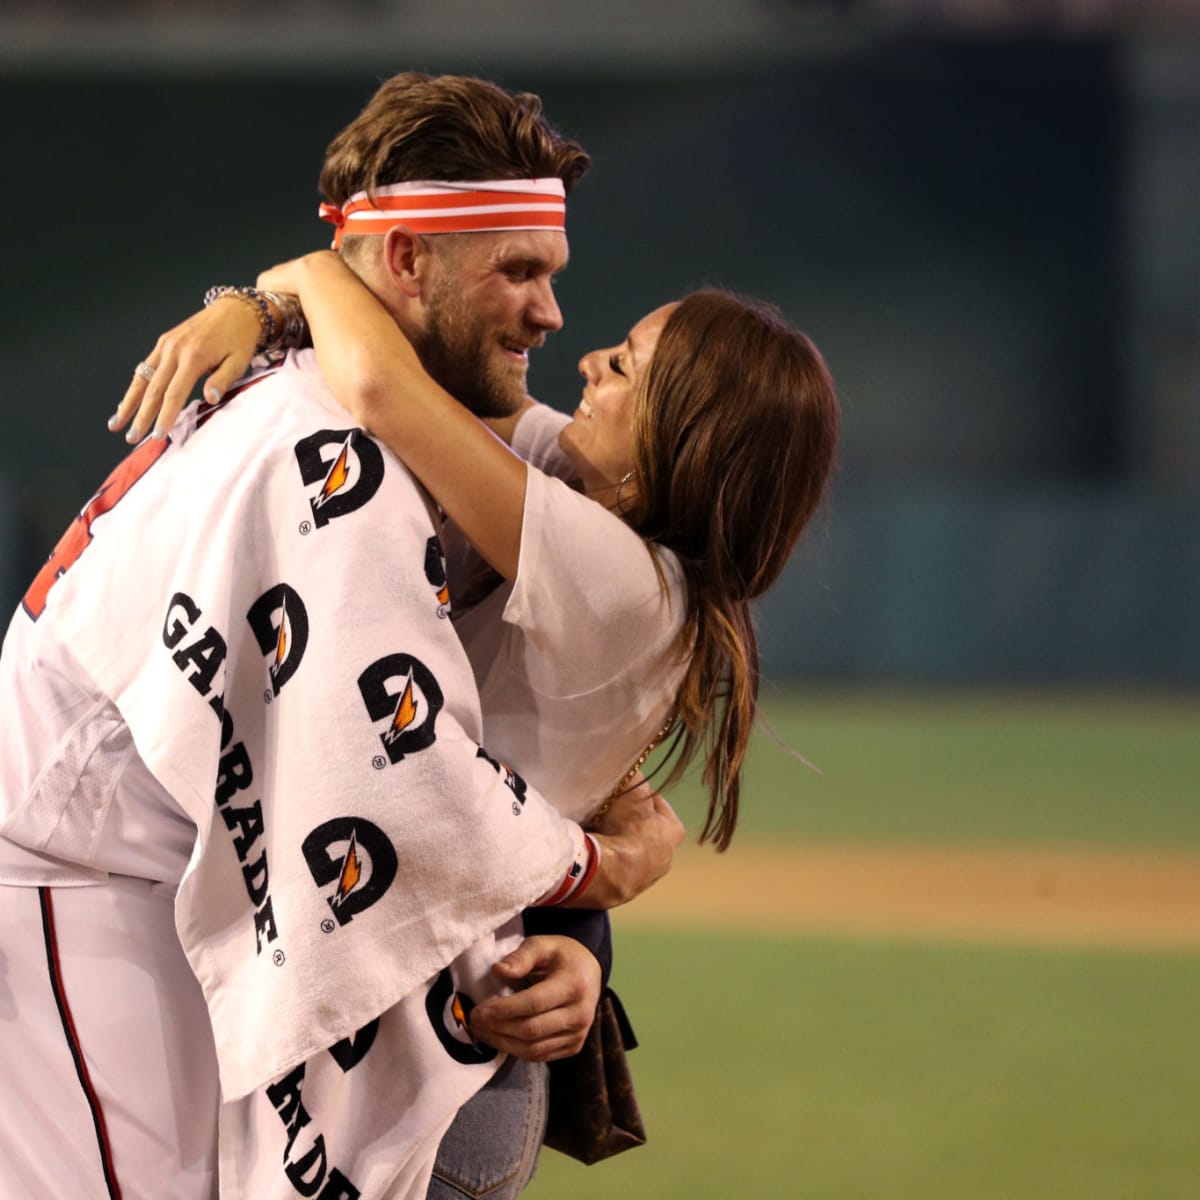 Bryce Harper surprised his wife with sweet custom jacket for playoffs